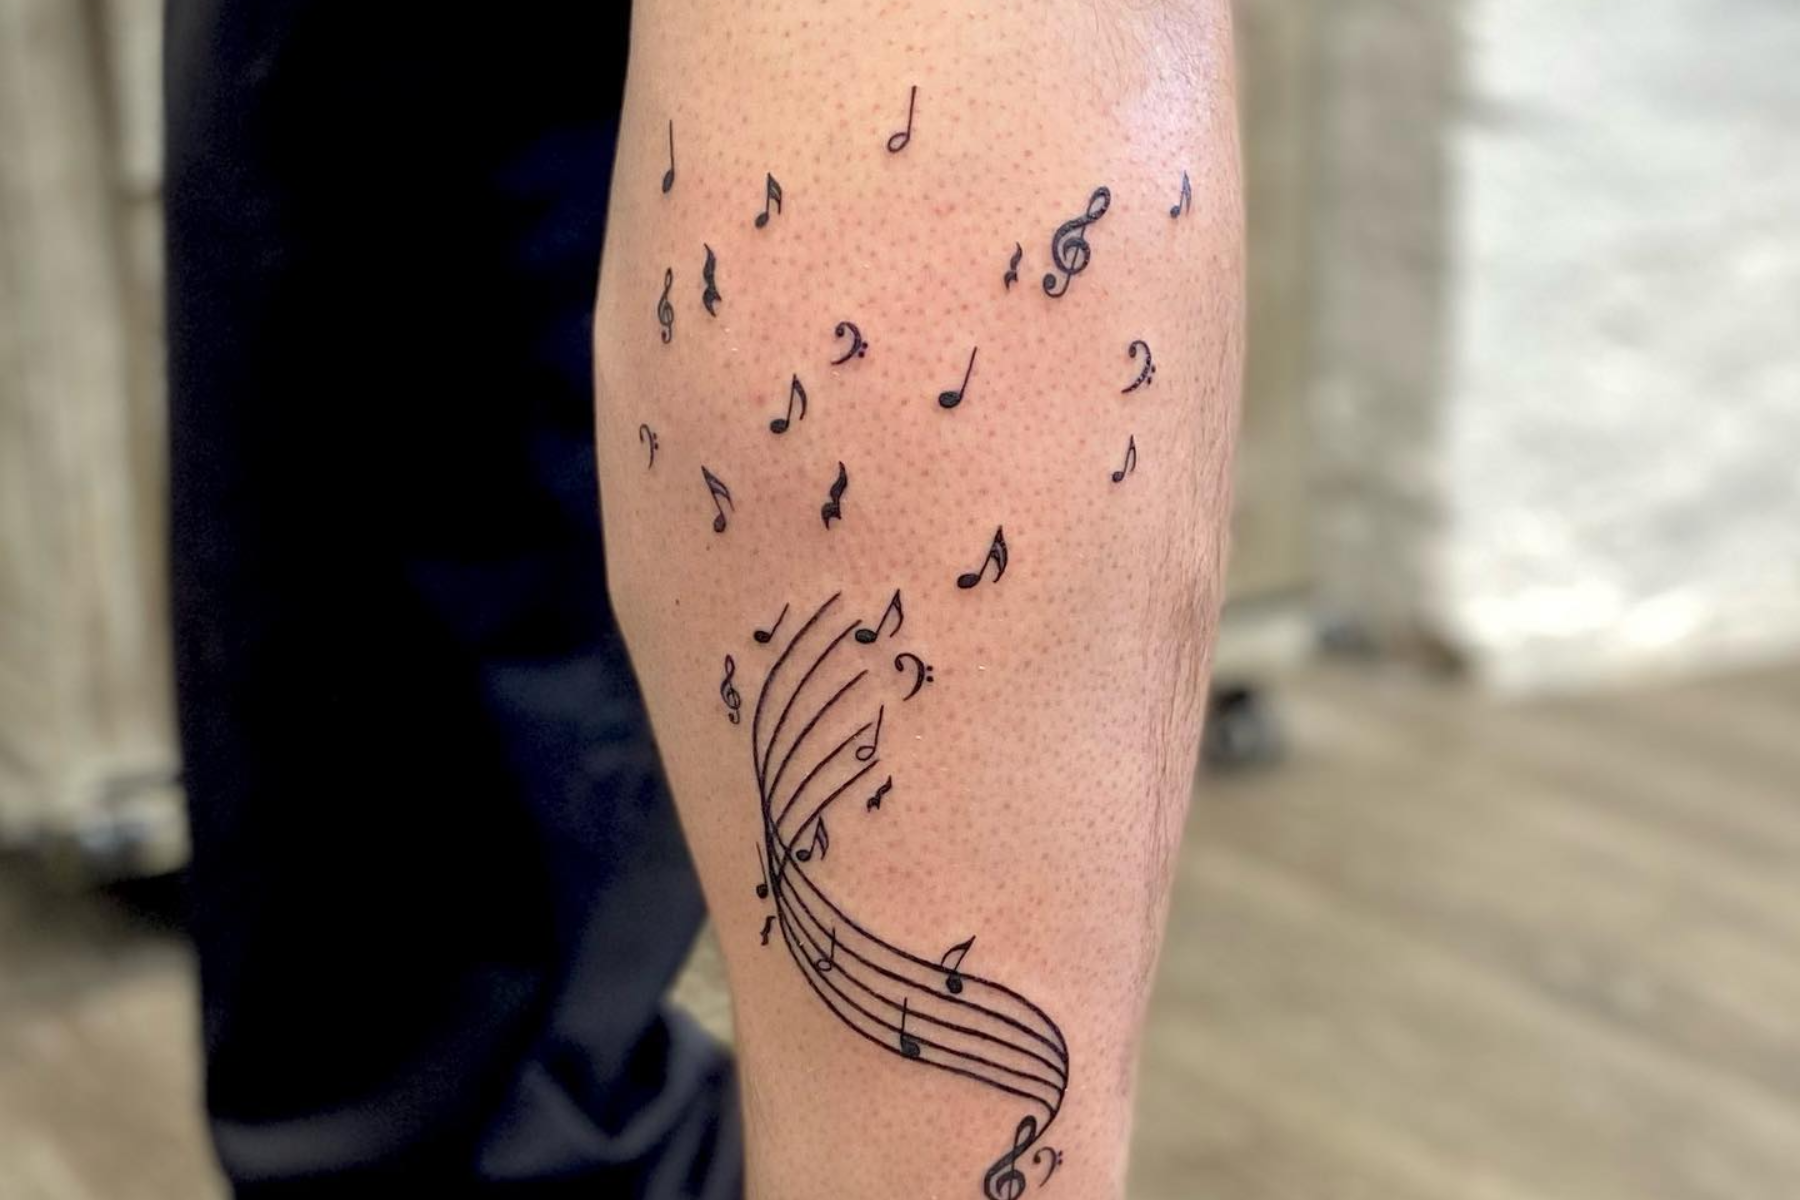 Tattoo uploaded by Constantinos Christofi • The #love for #music #heartbeat  • Tattoodo